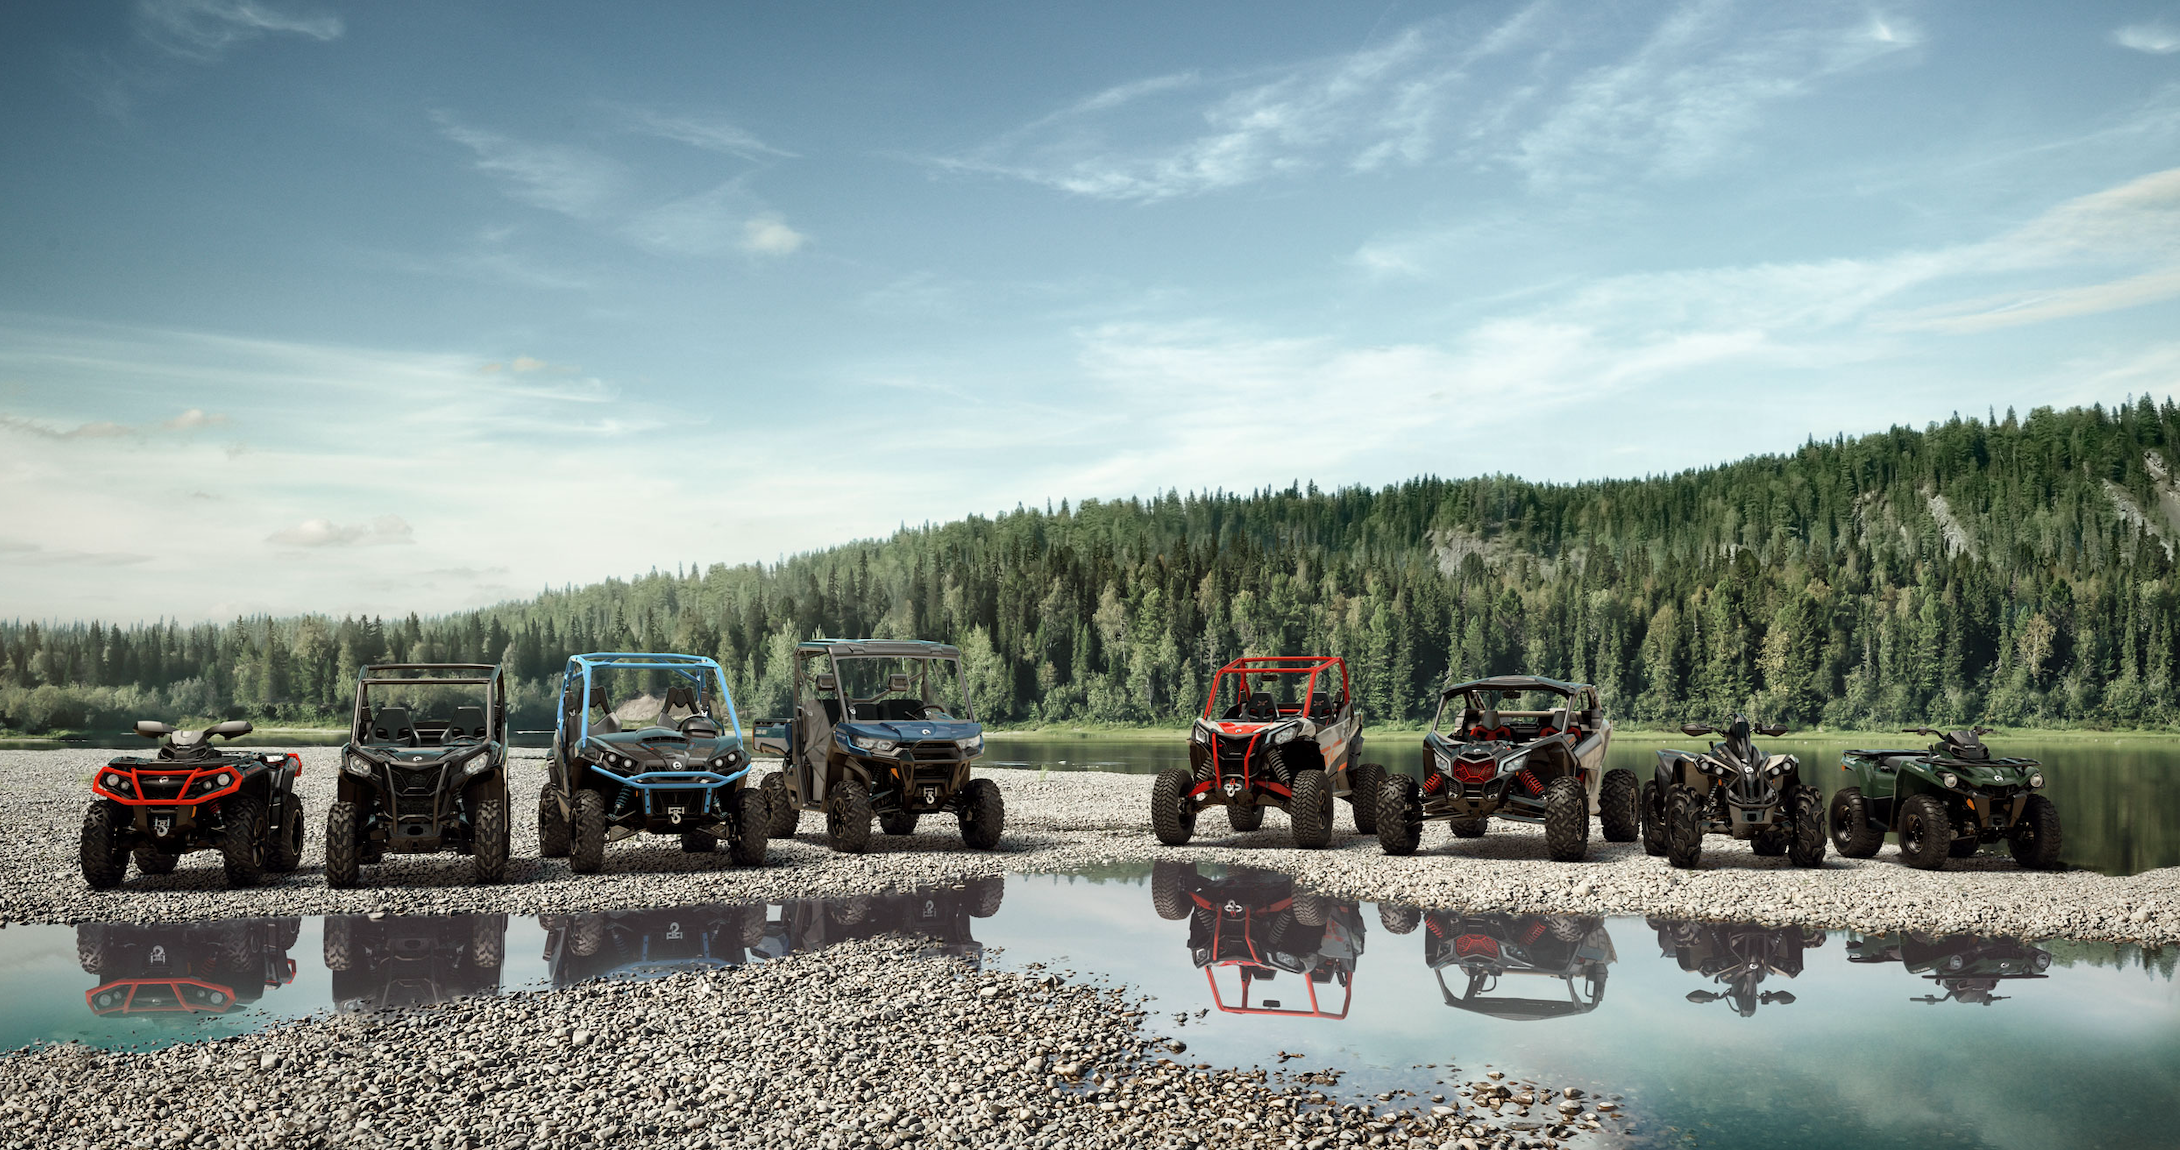 ATV OR SSV? FIND THE BEST ORV FOR FARM USE